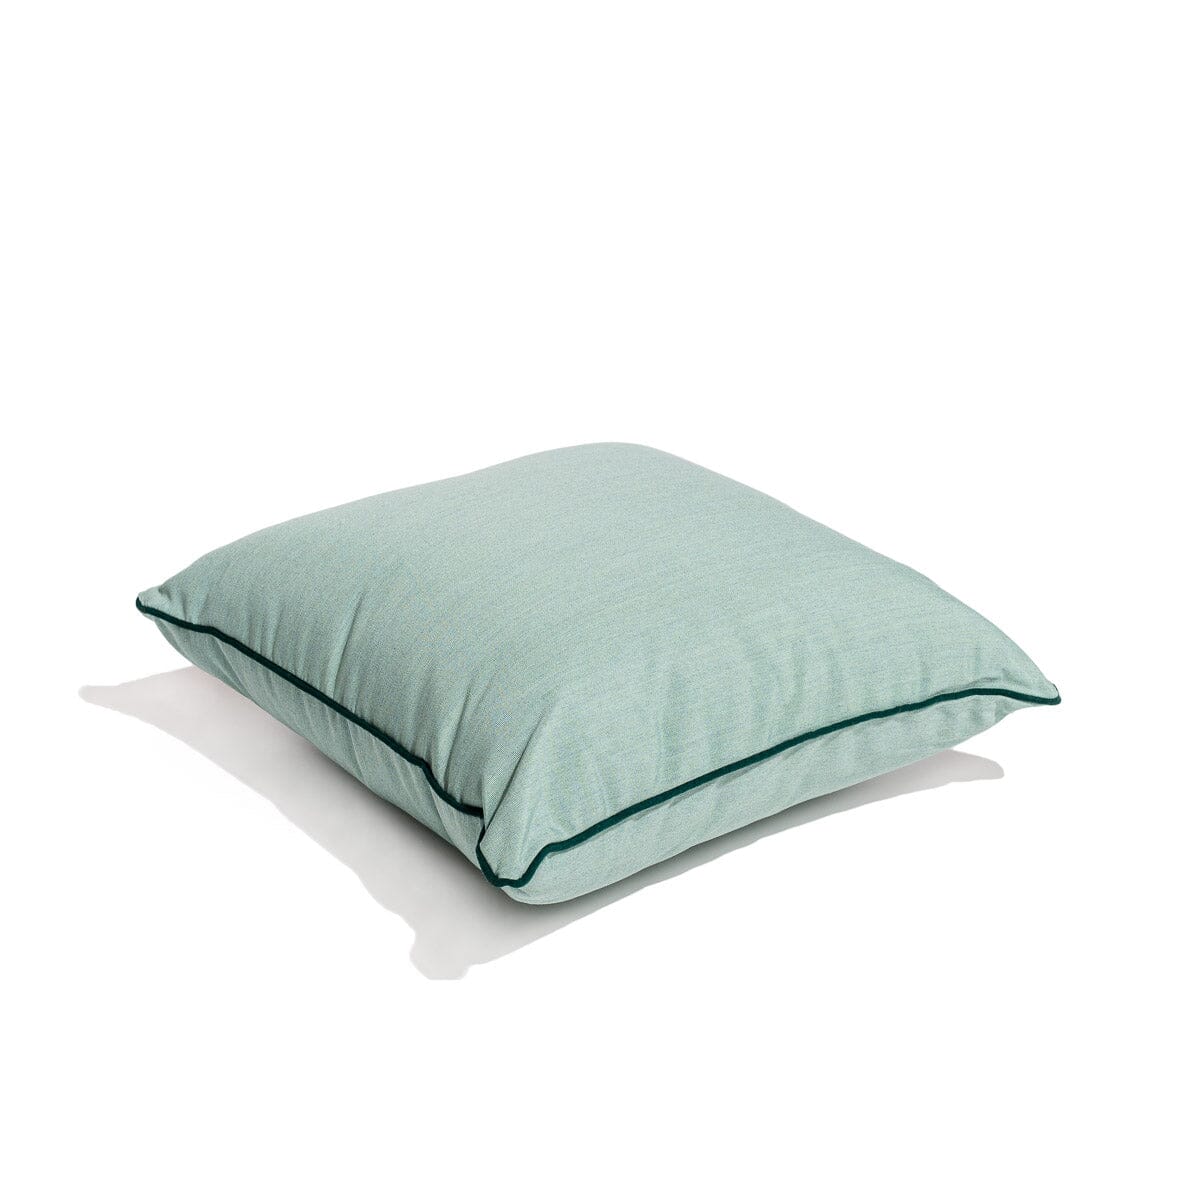 The Small Square Throw Pillow - Rivie Green Small Square Throw Pillow Business & Pleasure Co Aus 